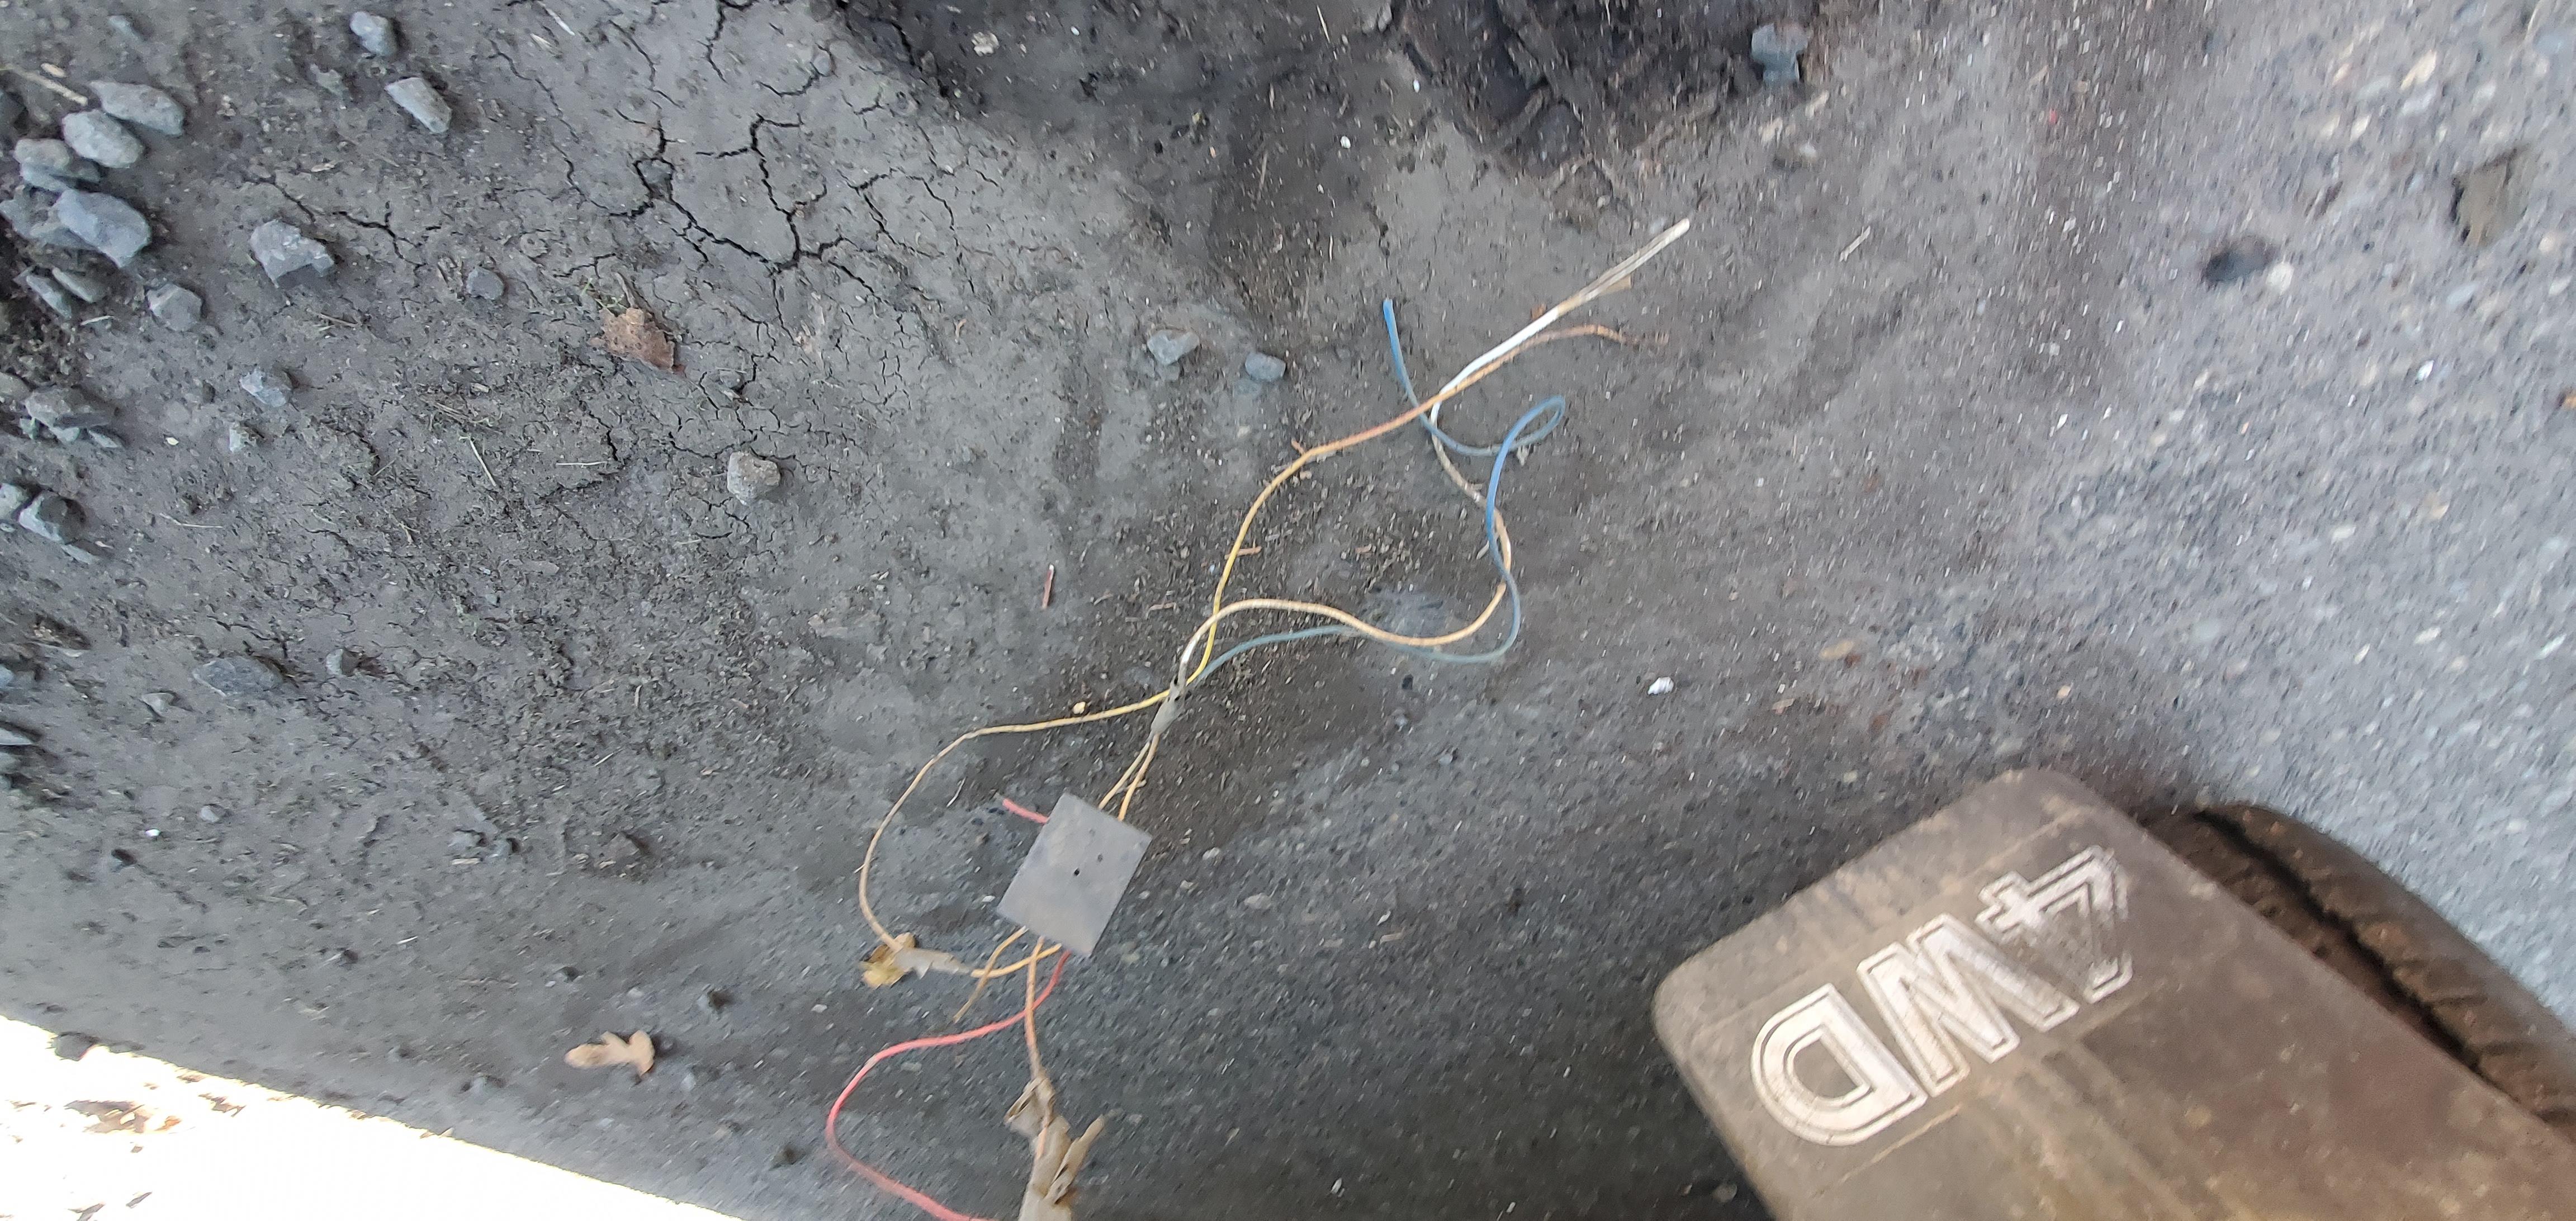 Wiring box that was connected to a tail light